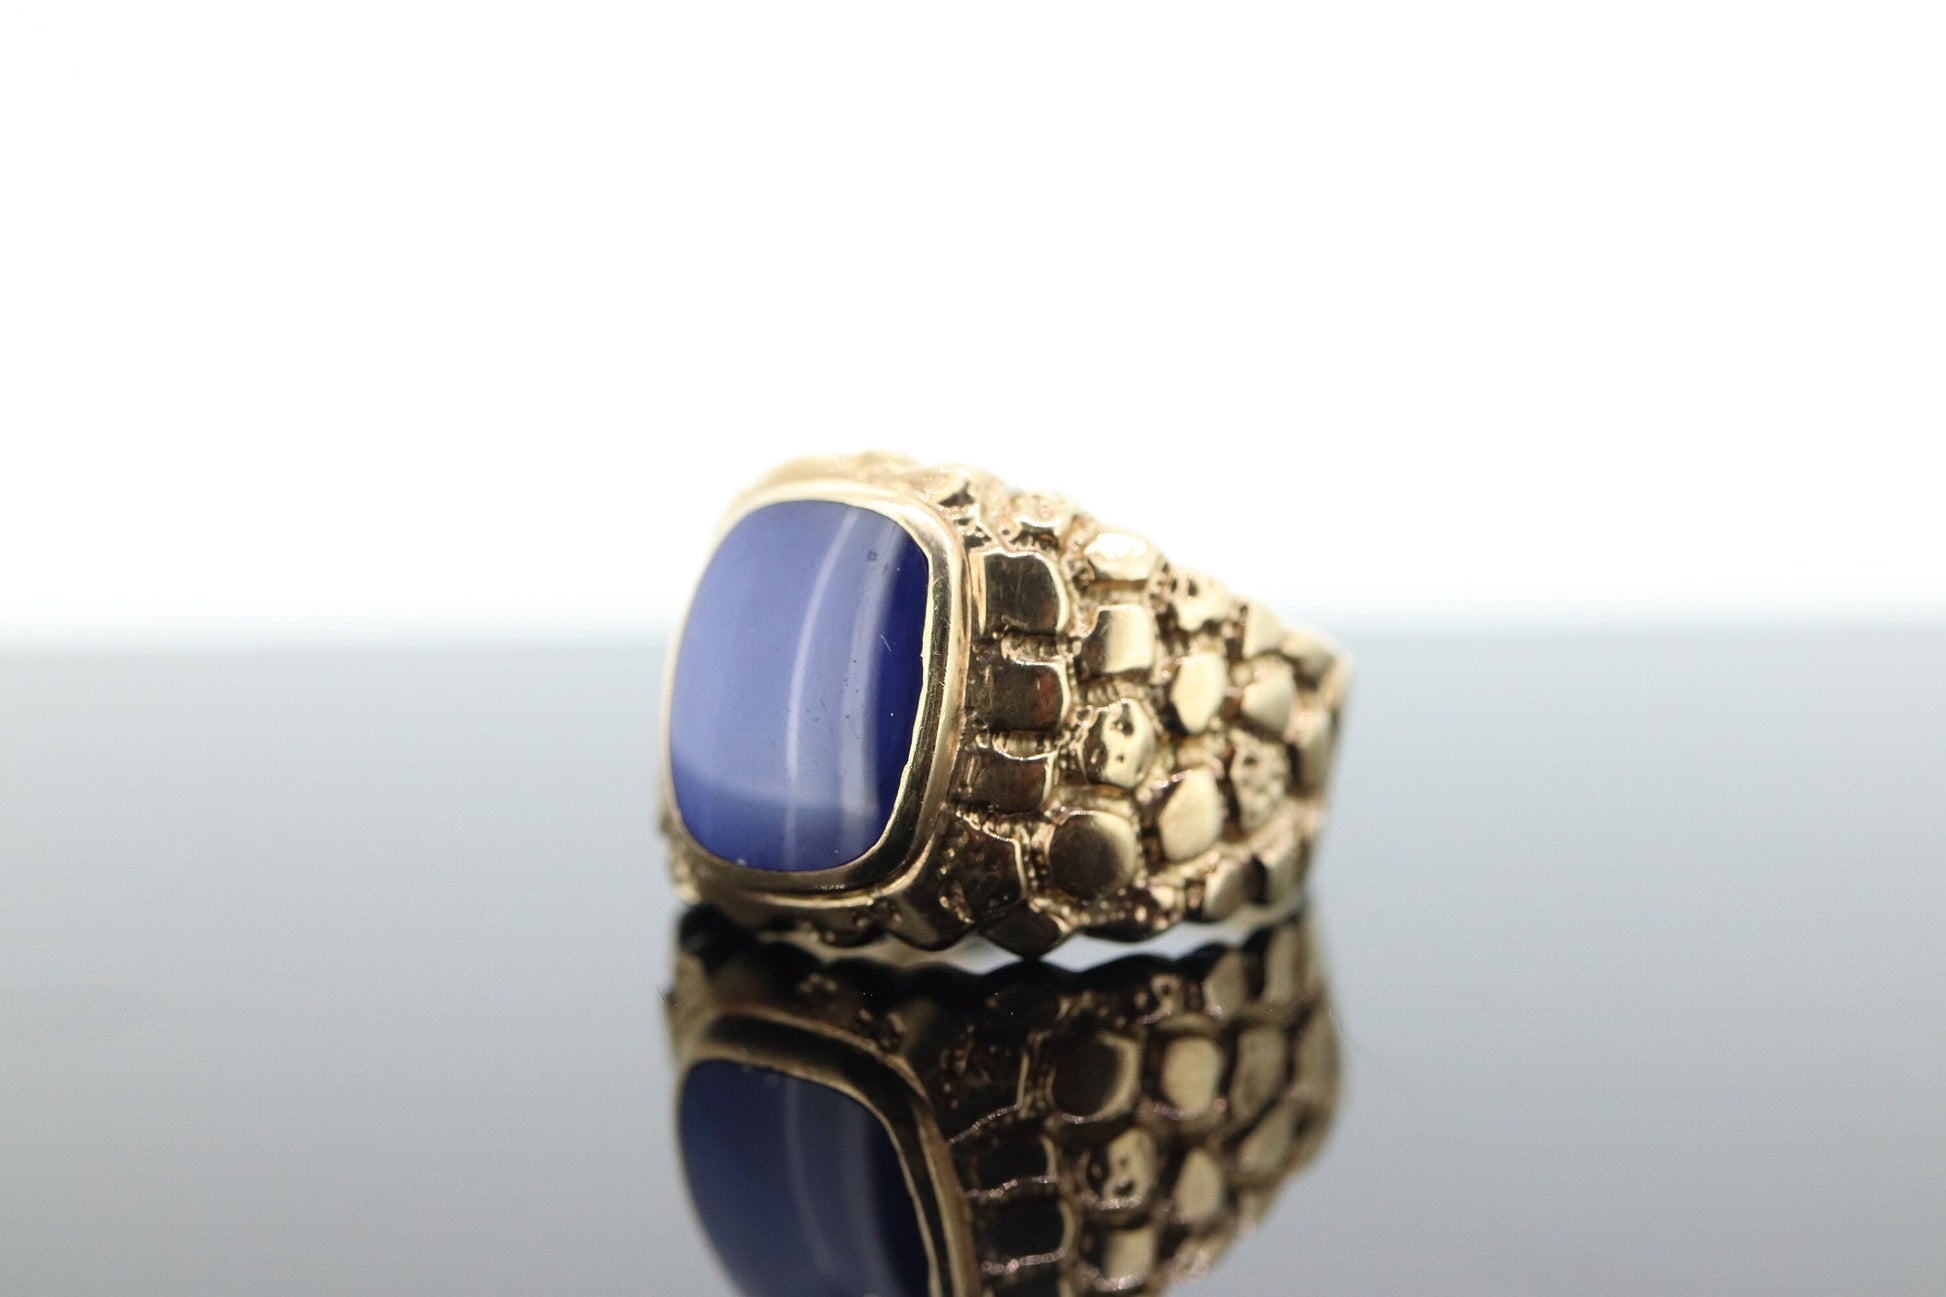 10k Star Sapphire ring. 10k Yellow Gold Nugget Mens Star Sapphire Cabochon signet ring. st(153)